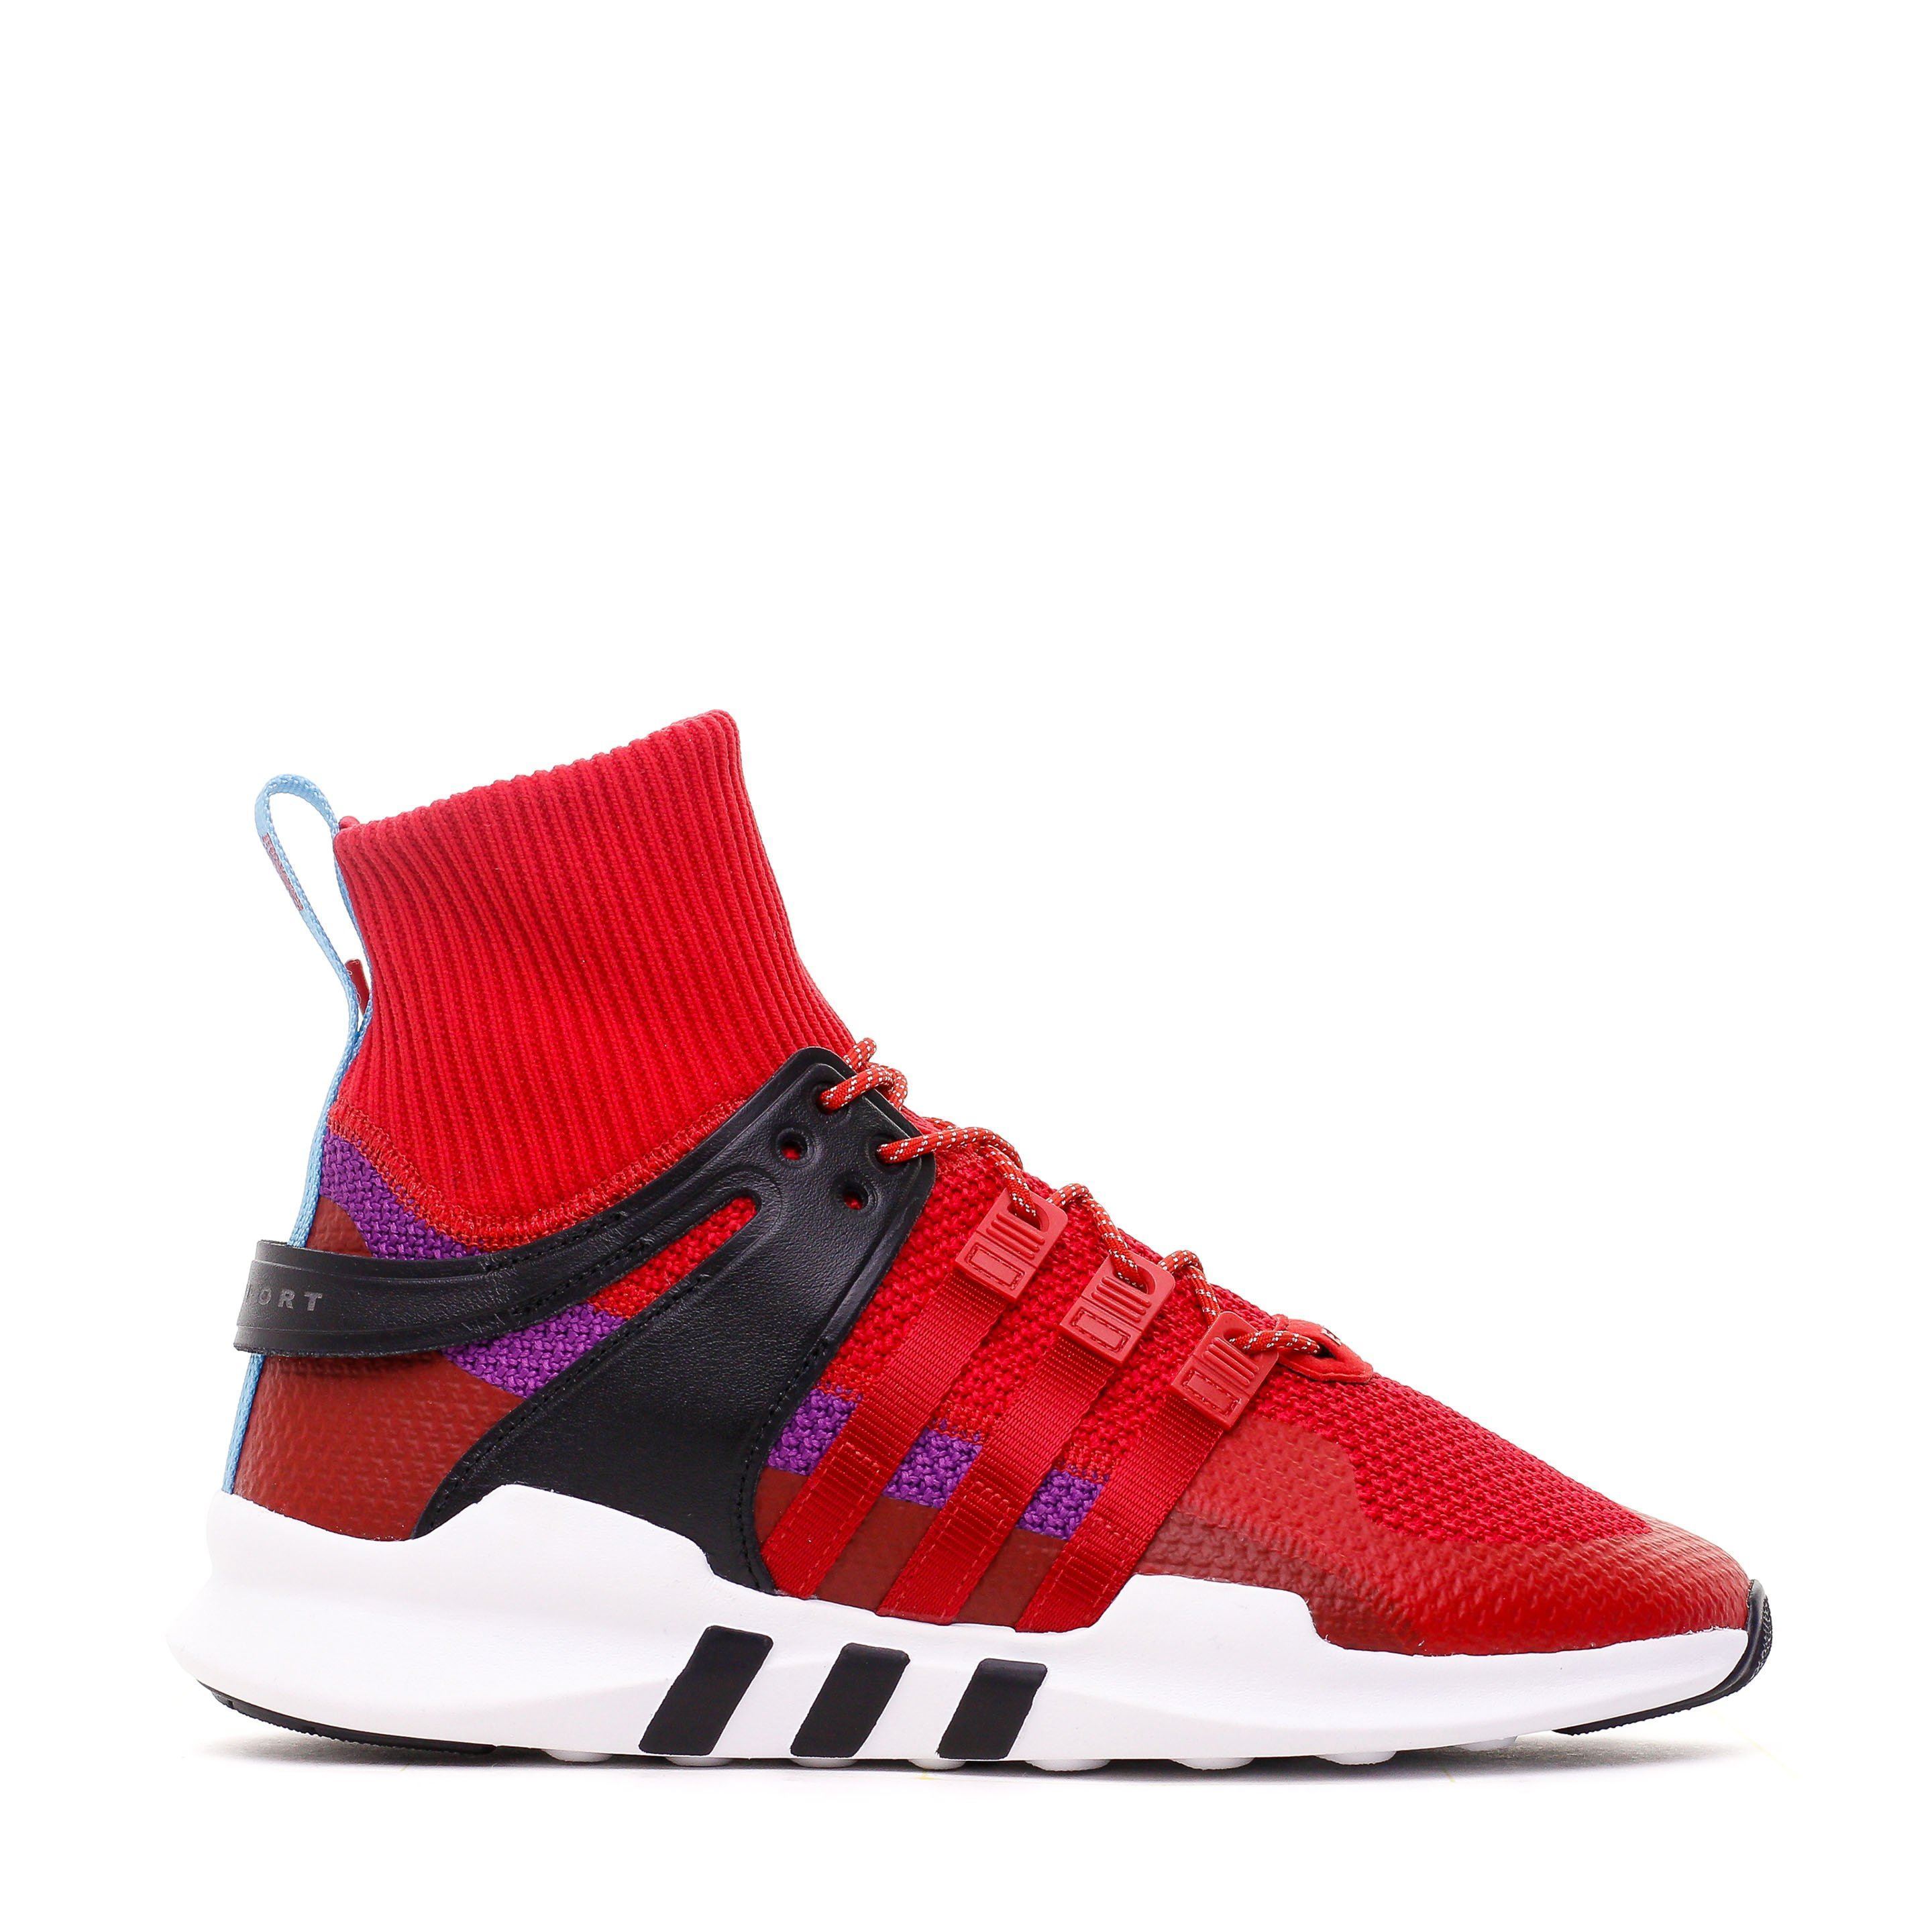 adidas superstar track pants mens outfits shoes